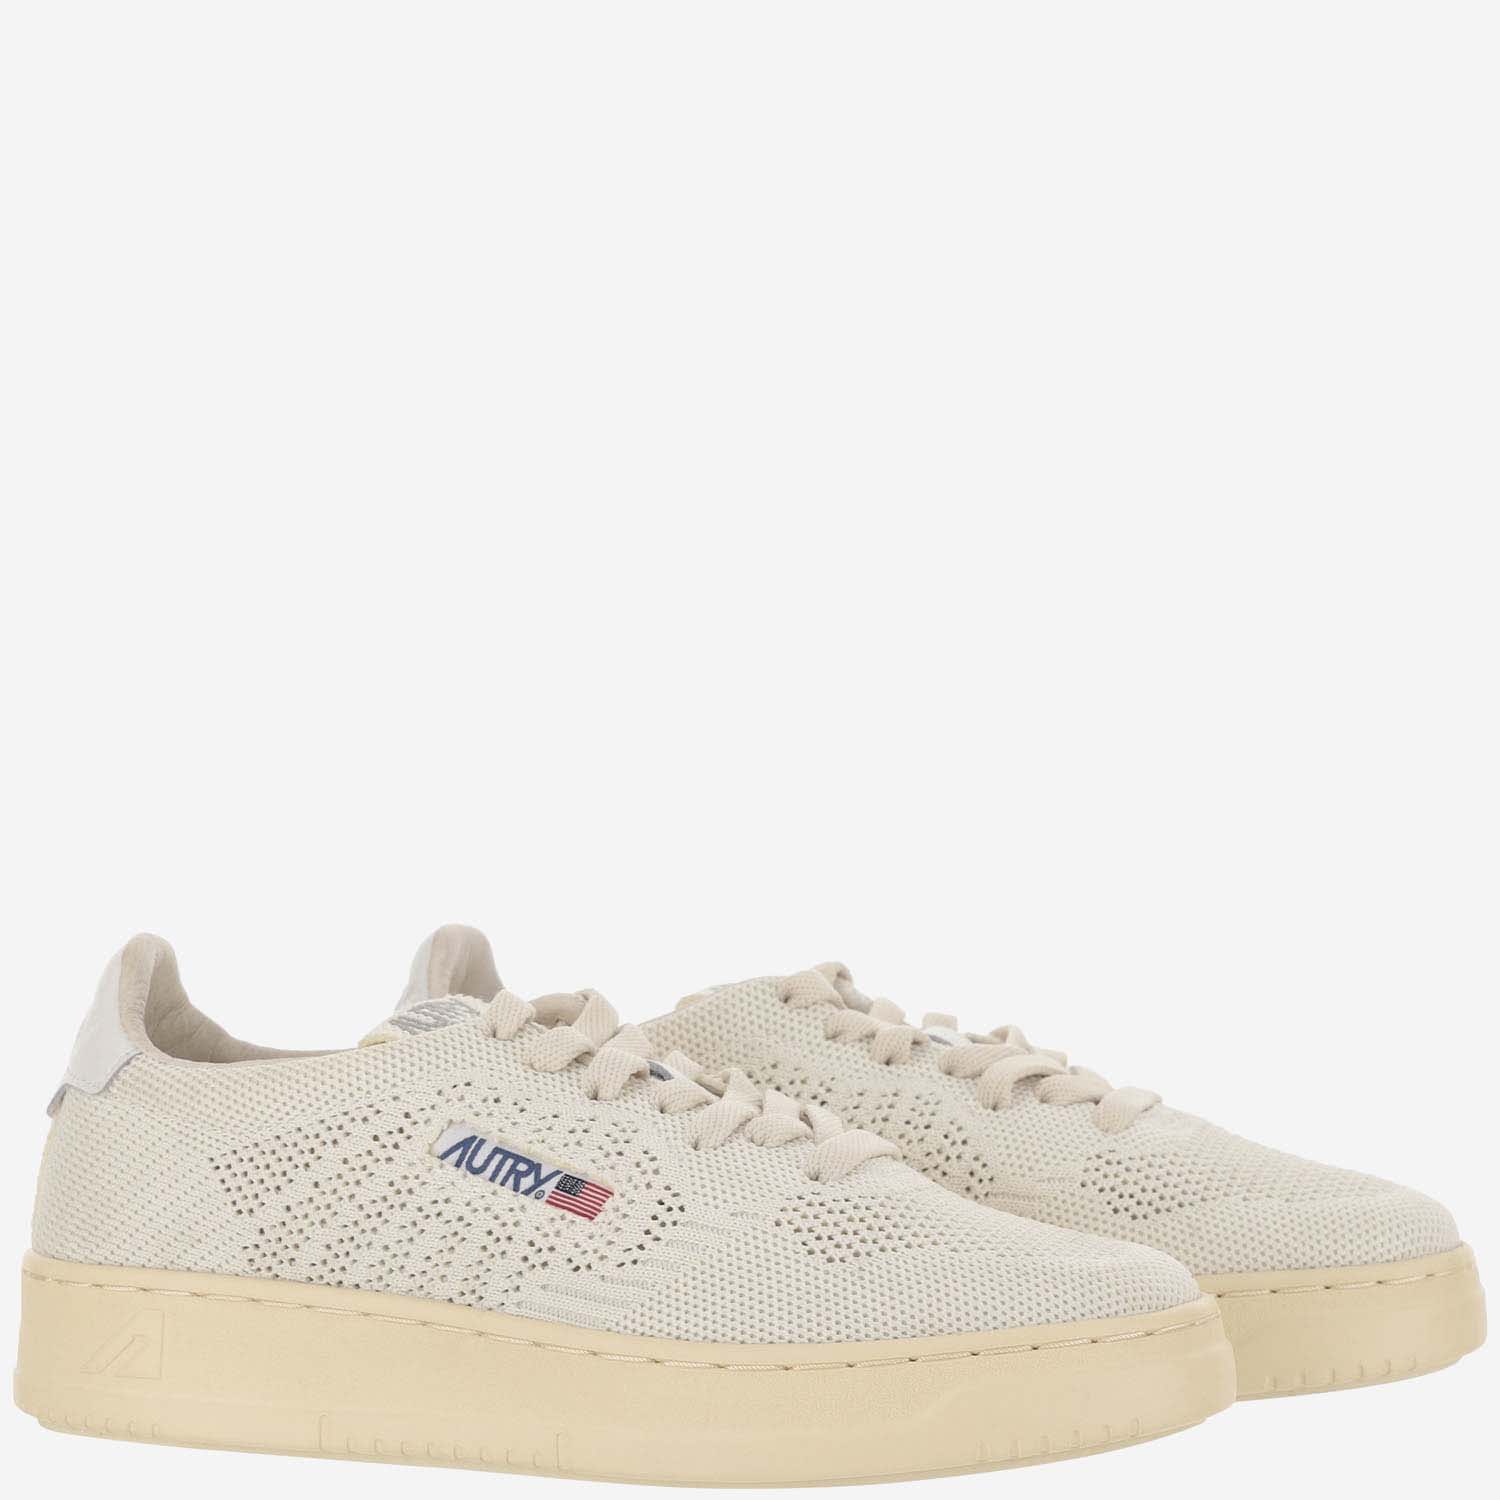 Shop Autry Medalist Easeknit Low Fabric Sneakers